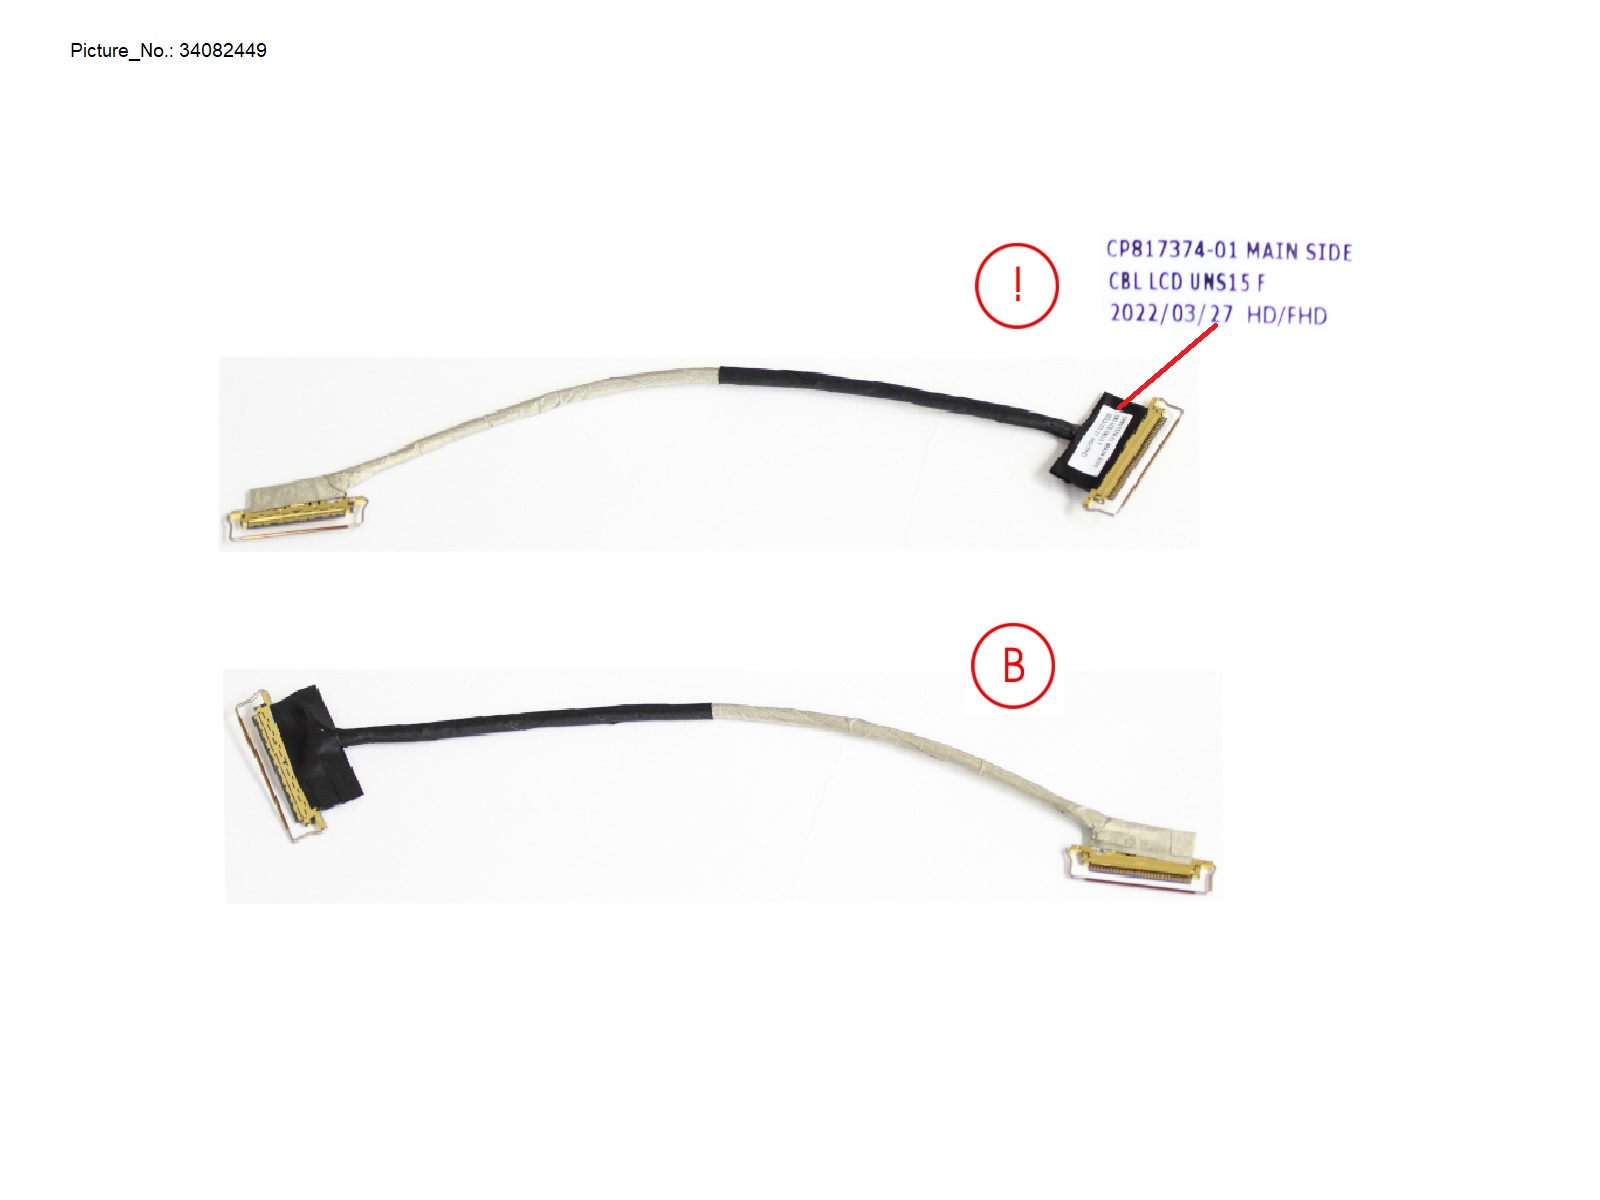 FUJITSU CABLE, LCD FOR HD/FHD